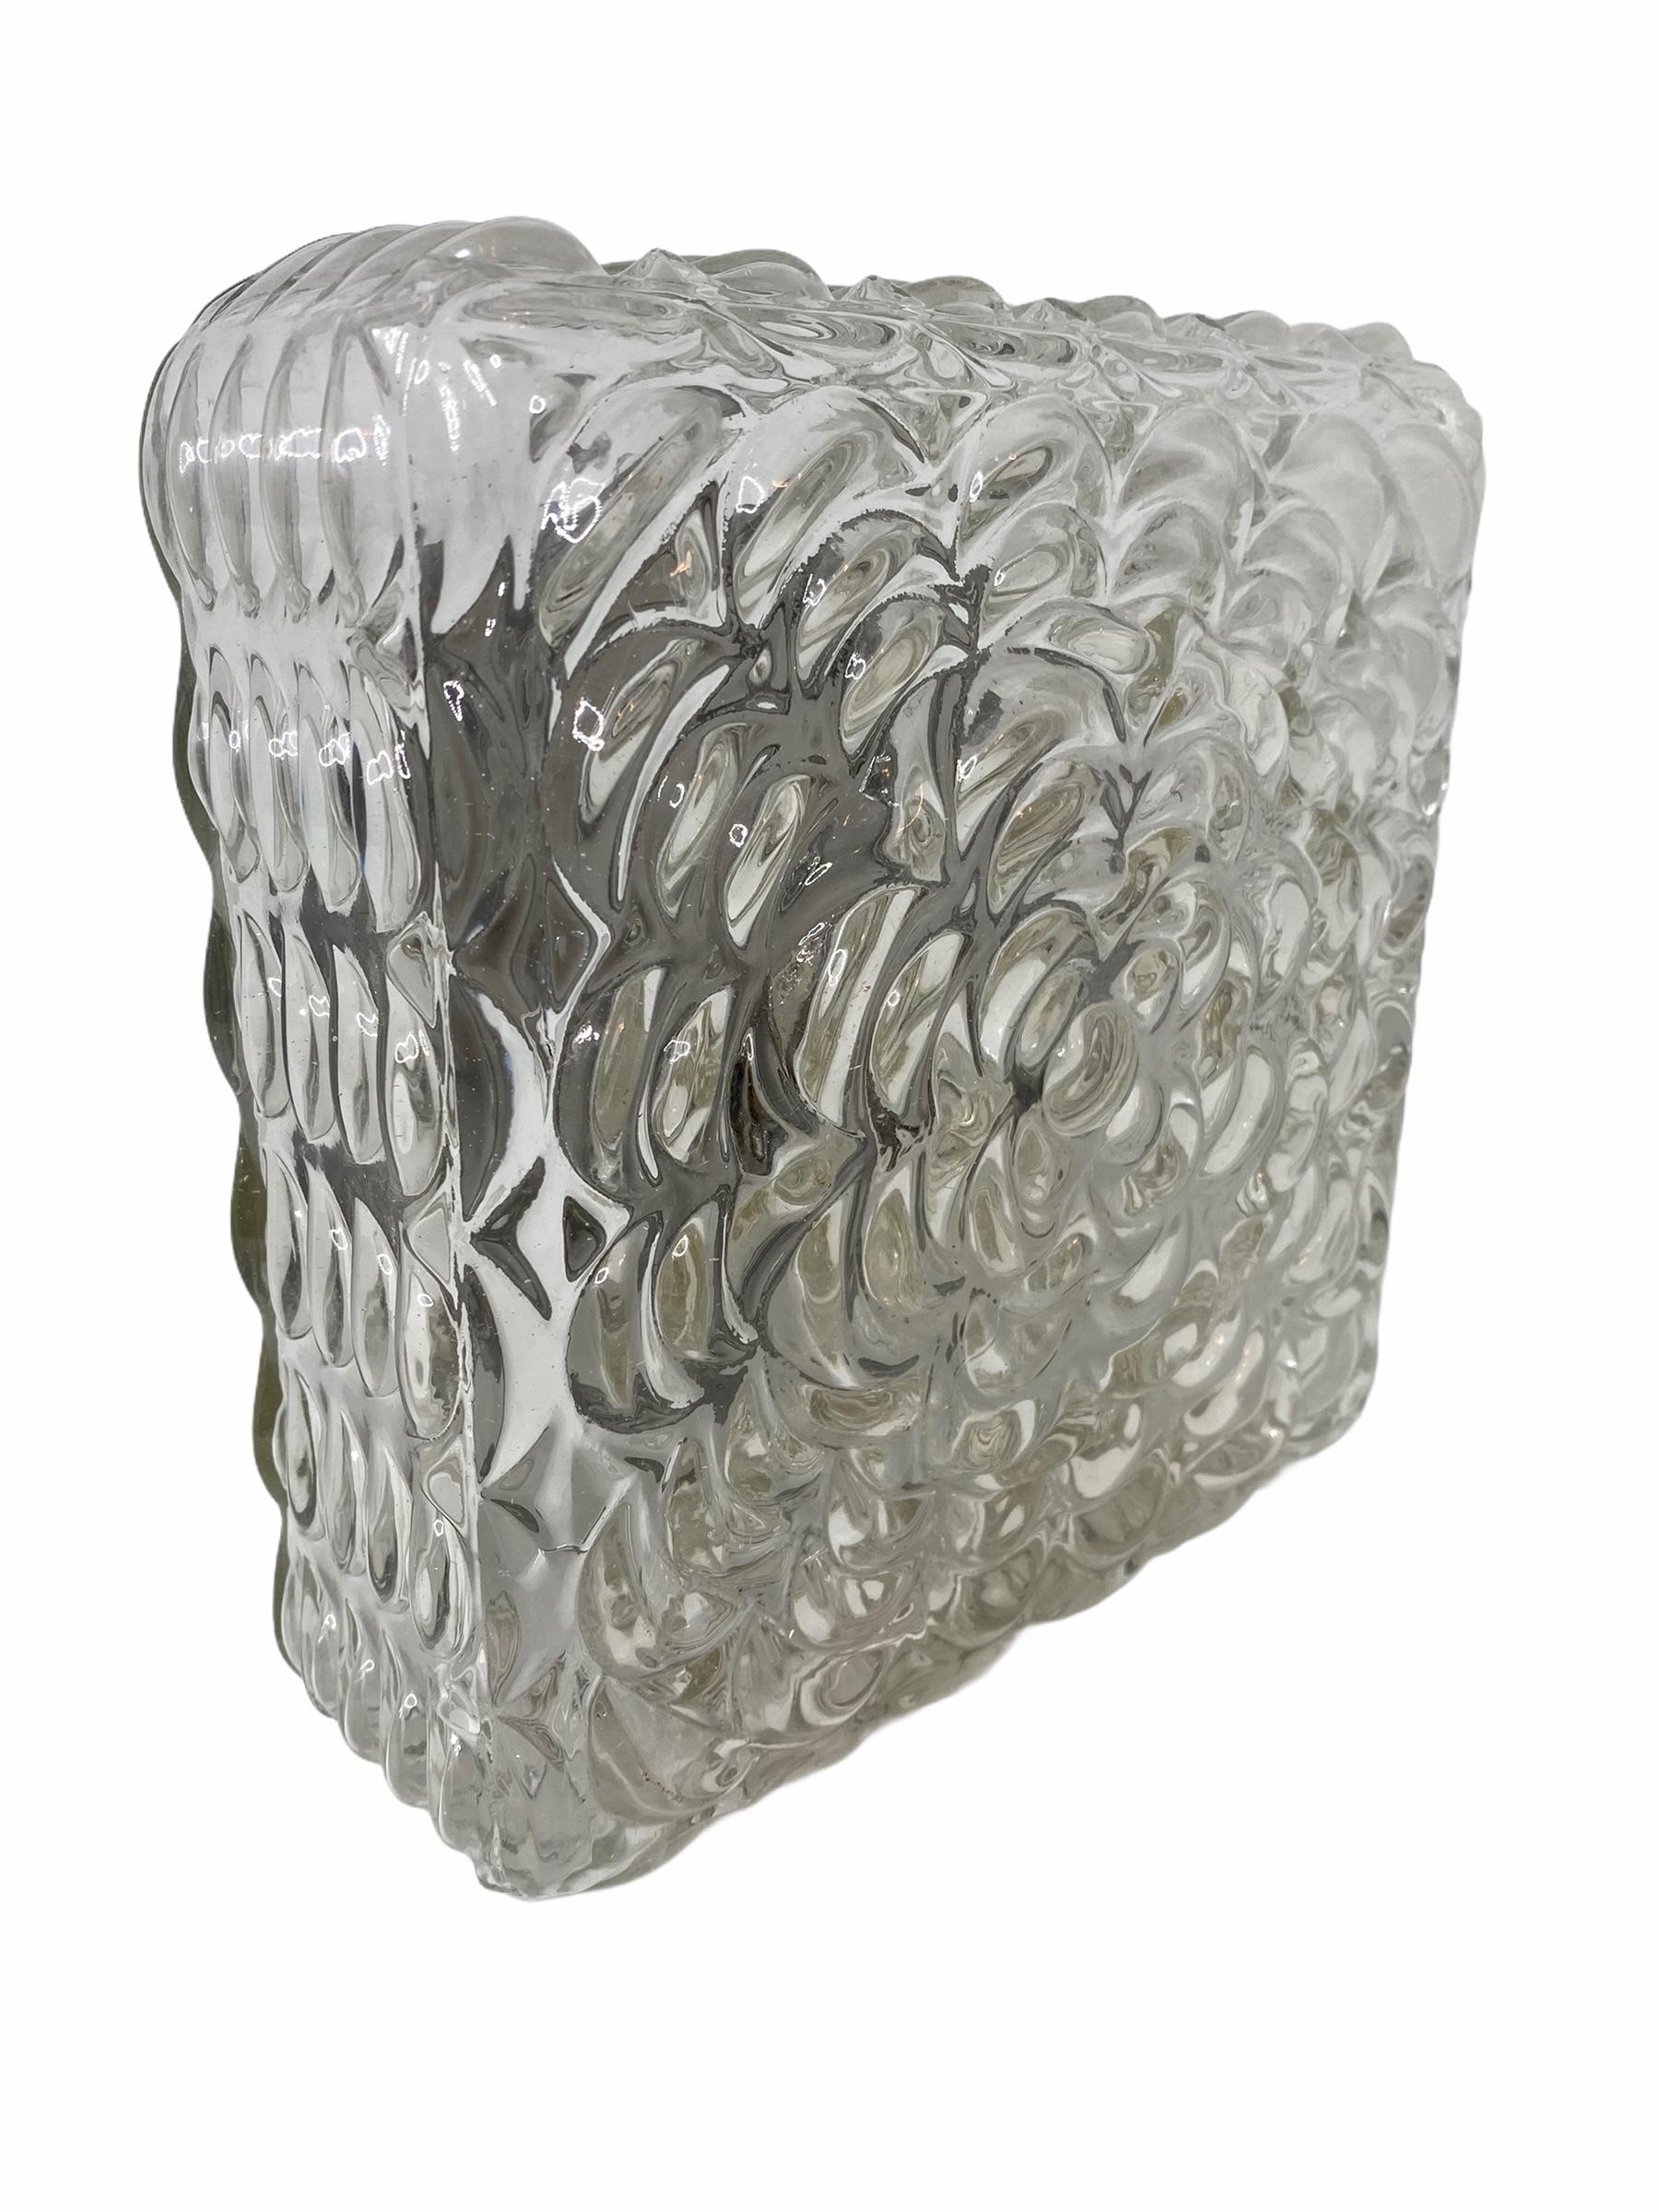 Petite flower pattern flush mount. Gorgeous textured glass flush mount with metal fixture. The Fixture requires one European E14 / 110 Volt candelabra bulb, up to 60 watts.